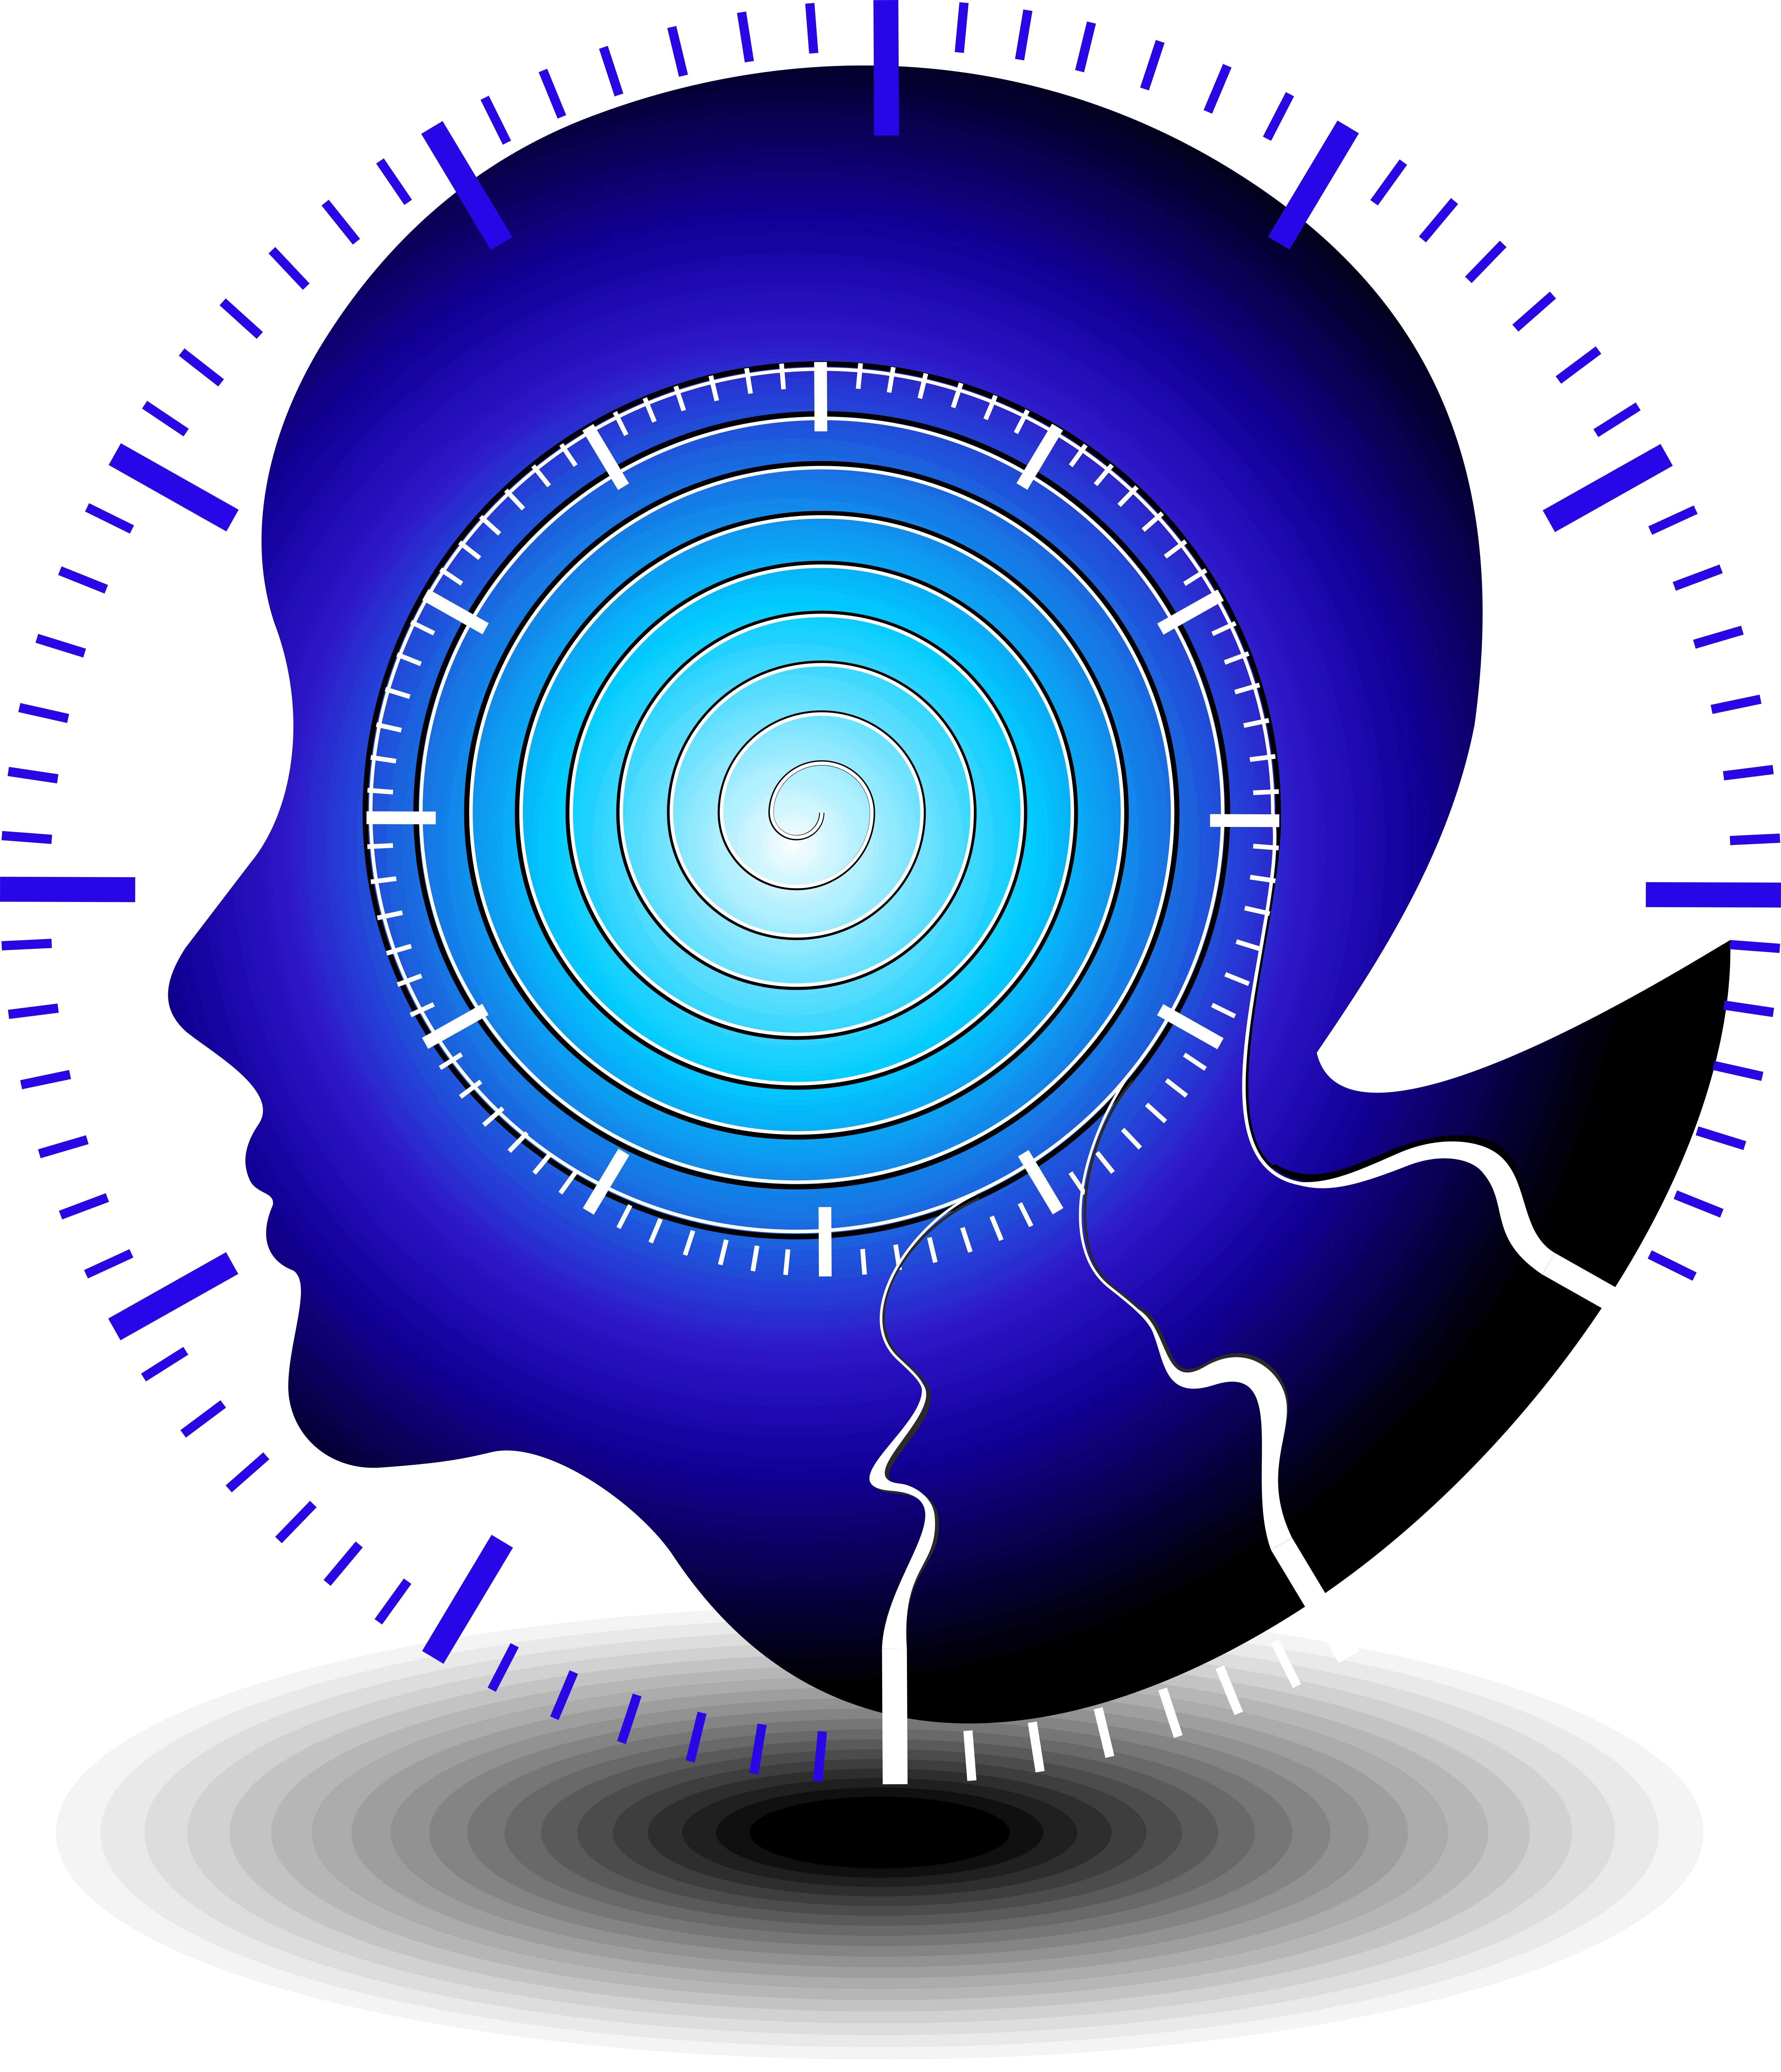 Self hypnosis for weight loss -a silhouette in blue of a head with a swirl in the middle out lined with time markings